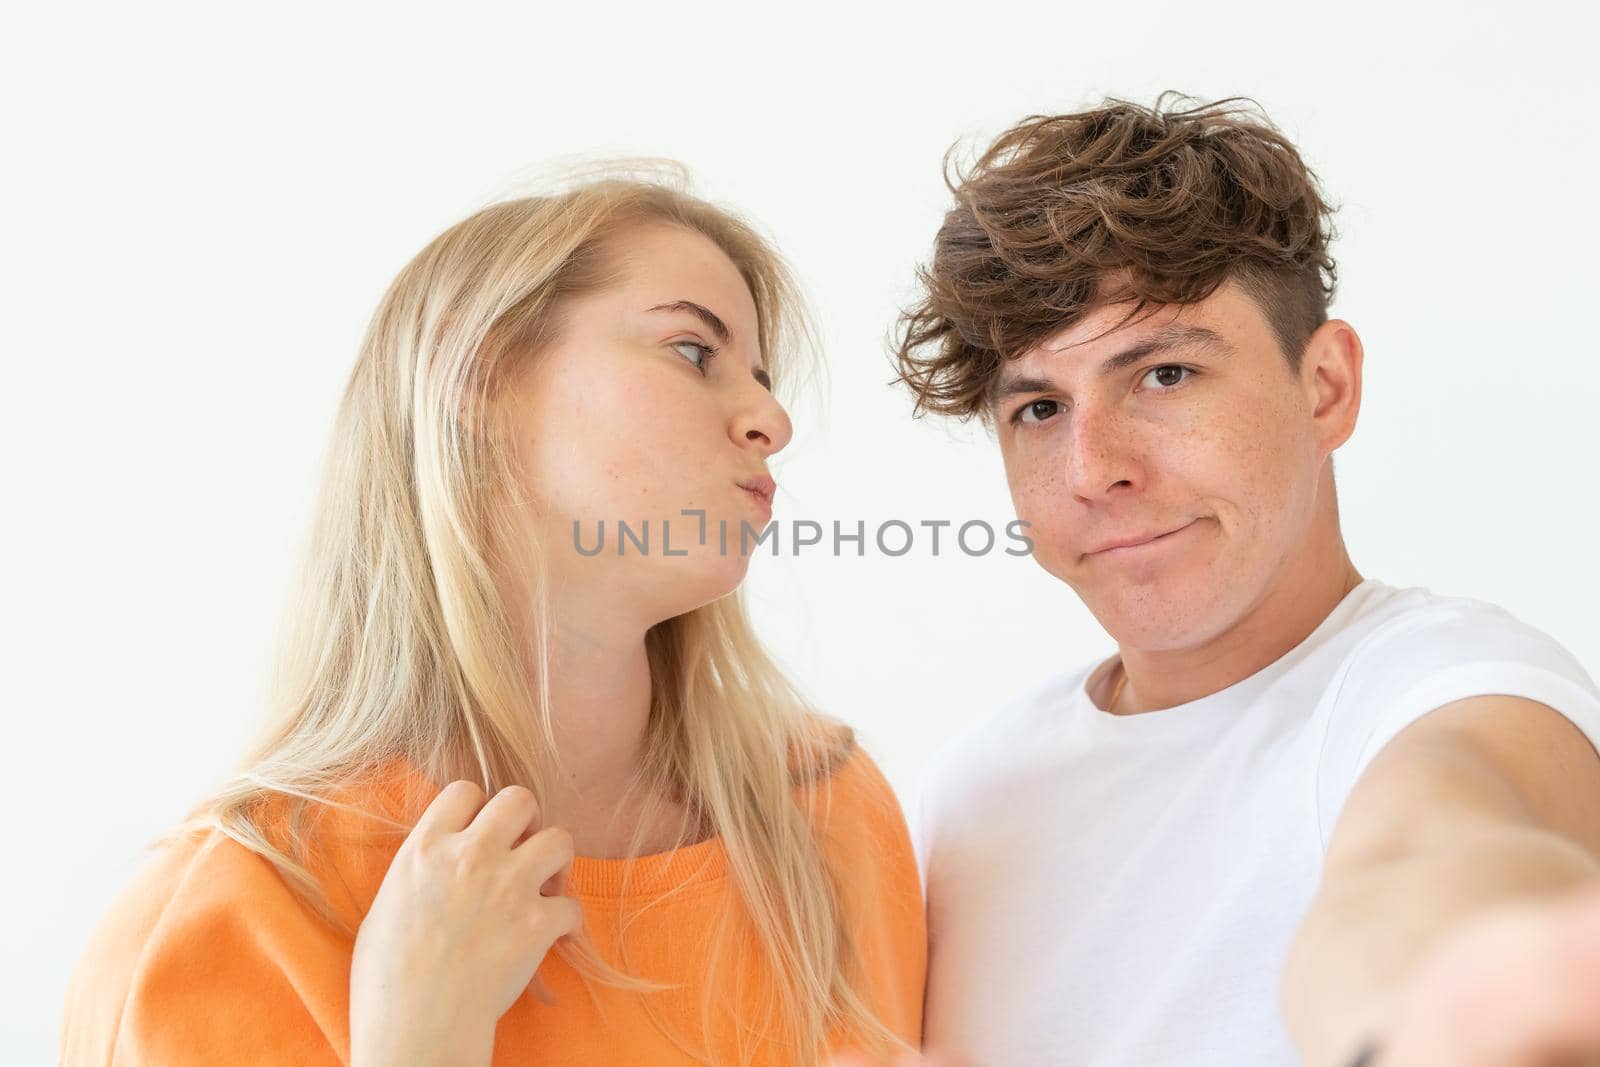 Charming young couple cute blond girl girl take a selfie posing over white background. Concept a young couple of teenagers or millennials In love